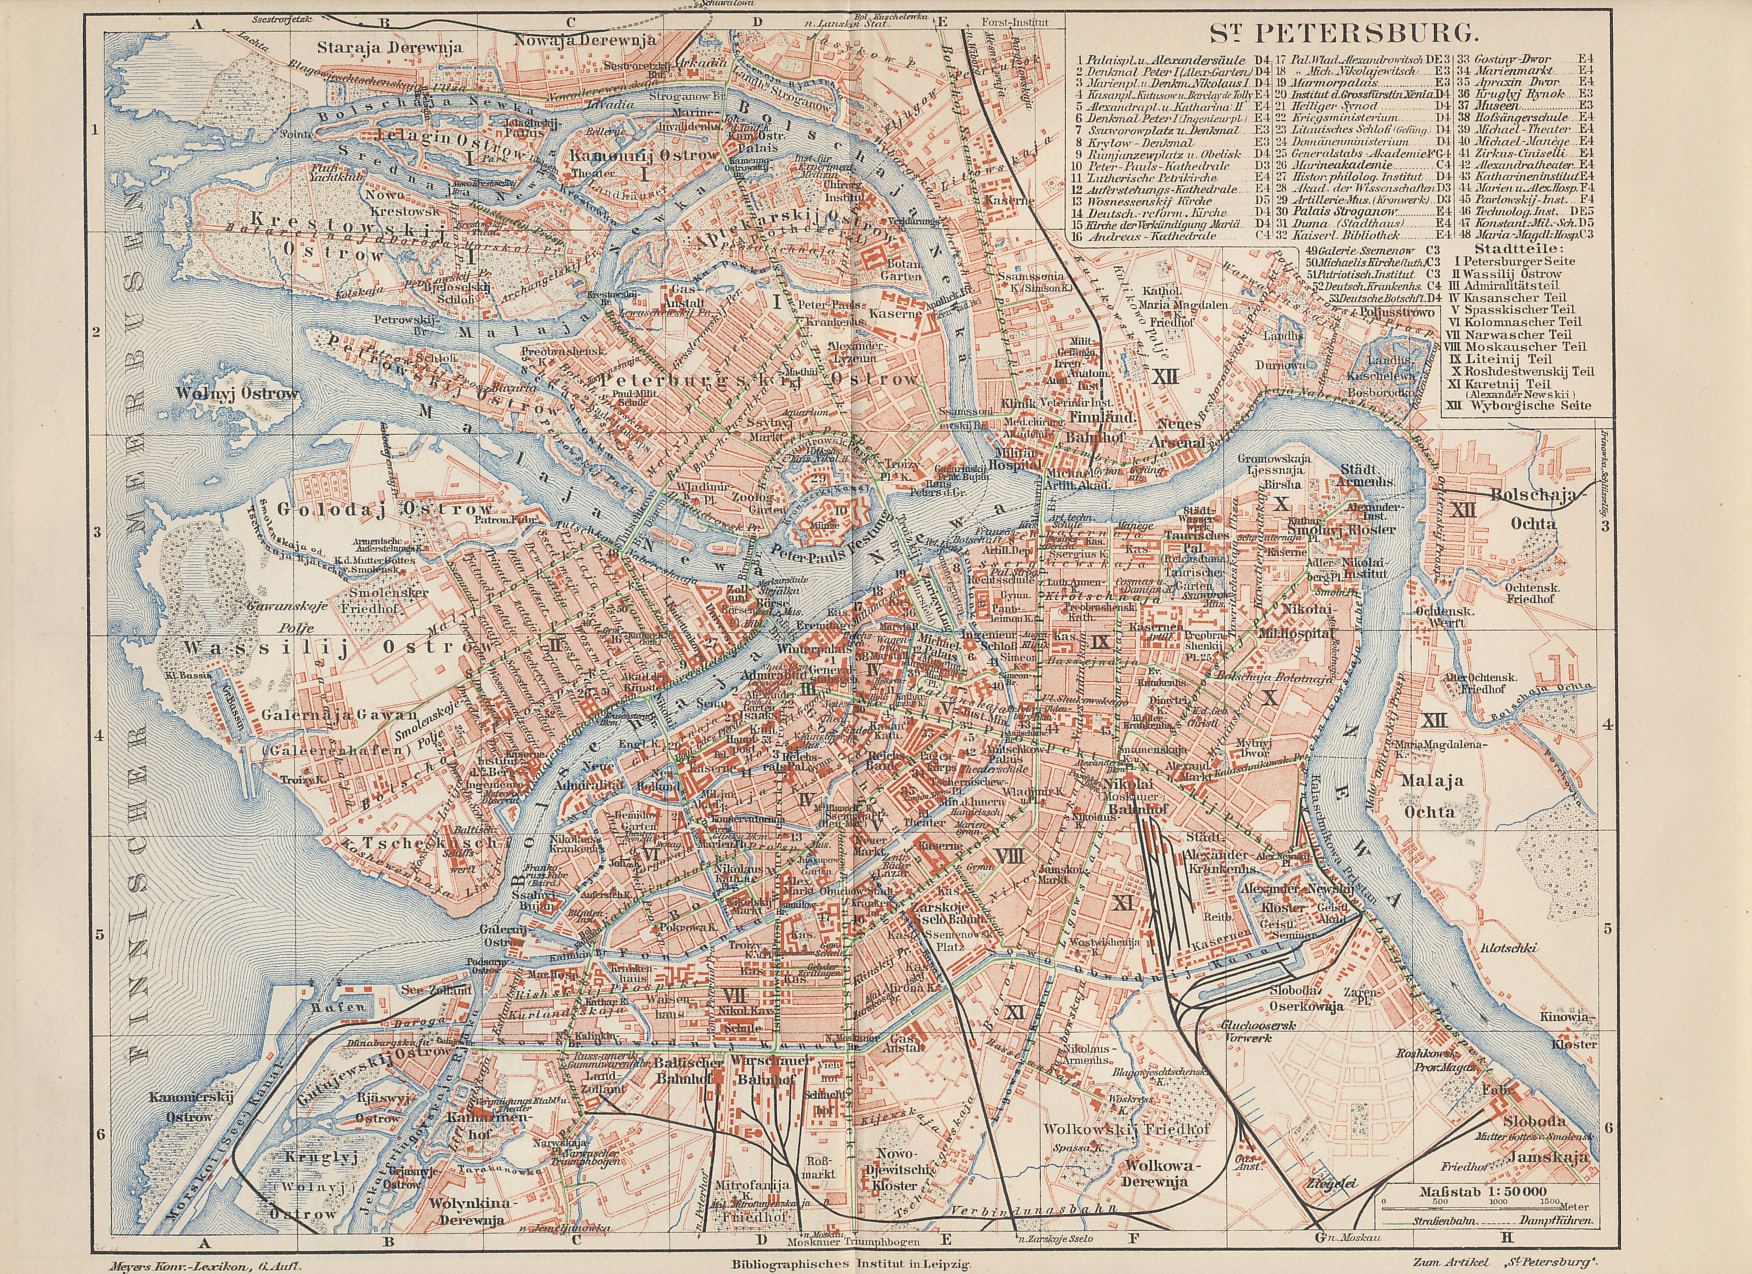 1898 map of St. Petersburg, the Russian capital, from a German atlas. Central St Petersburg, or Petrograd, is on the Neva River. Key landmarks include the Peter and Paul Fortress, which served as a prison, Nevski Prospect, a primary boulevard south of the Fortress, the Finland Train Station, east of the Fortress, where Lenin made his triumphal return, the Tauride (Taurisches) Palace, which housed the Duma and later the Petrograd Soviet.
Text:
St Petersburg (Petrograd); Neva River, Peter and Paul Fortress; Nevski Prospect, Finland Bahnhof (Train Station); Taurisches (Tauride) Palace